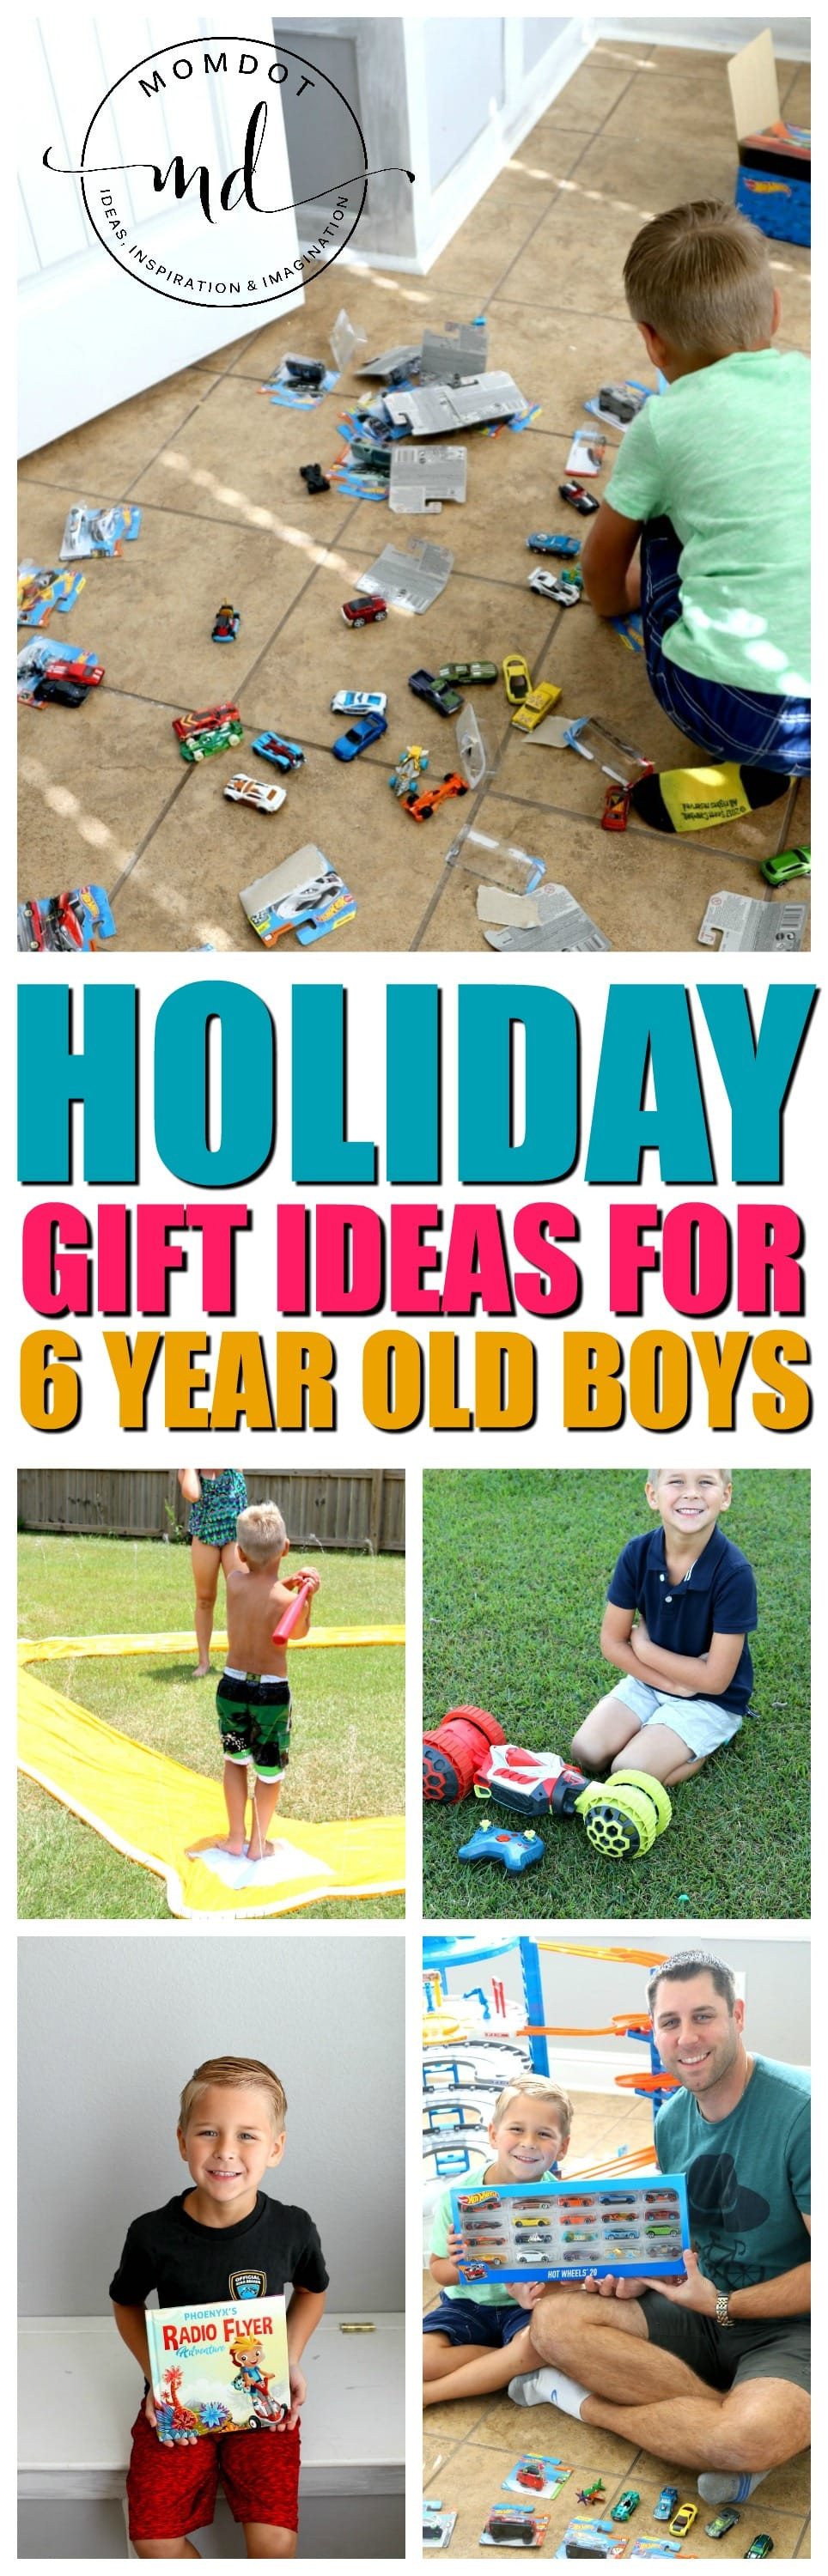 Gift Ideas For Boys Age 6
 Gift Ideas for 6 Year Old Boys